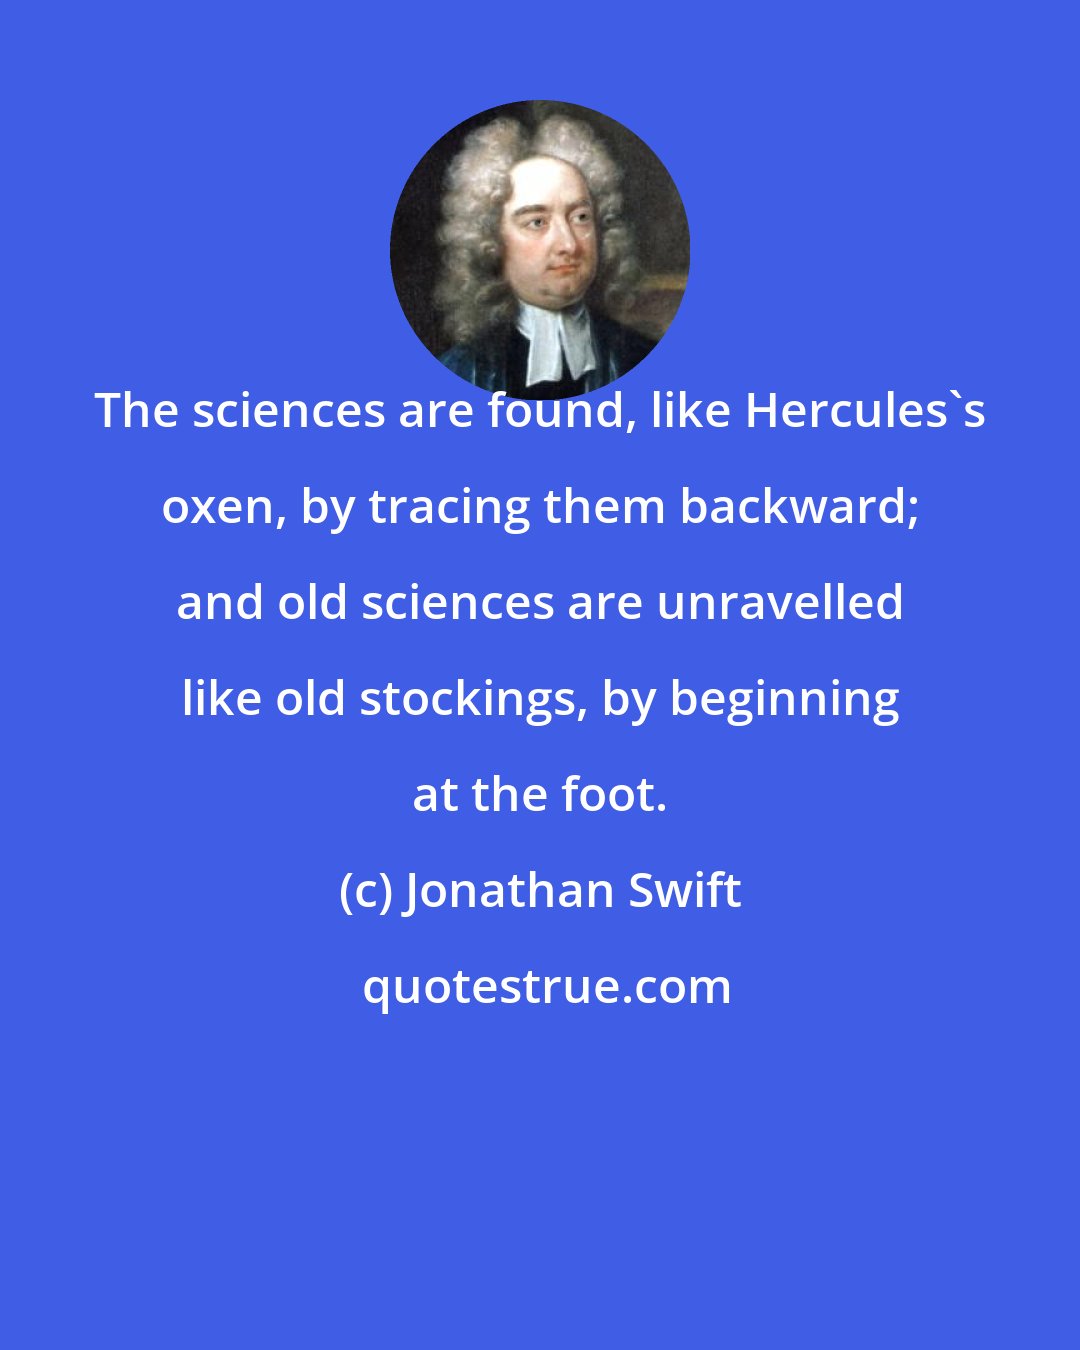 Jonathan Swift: The sciences are found, like Hercules's oxen, by tracing them backward; and old sciences are unravelled like old stockings, by beginning at the foot.